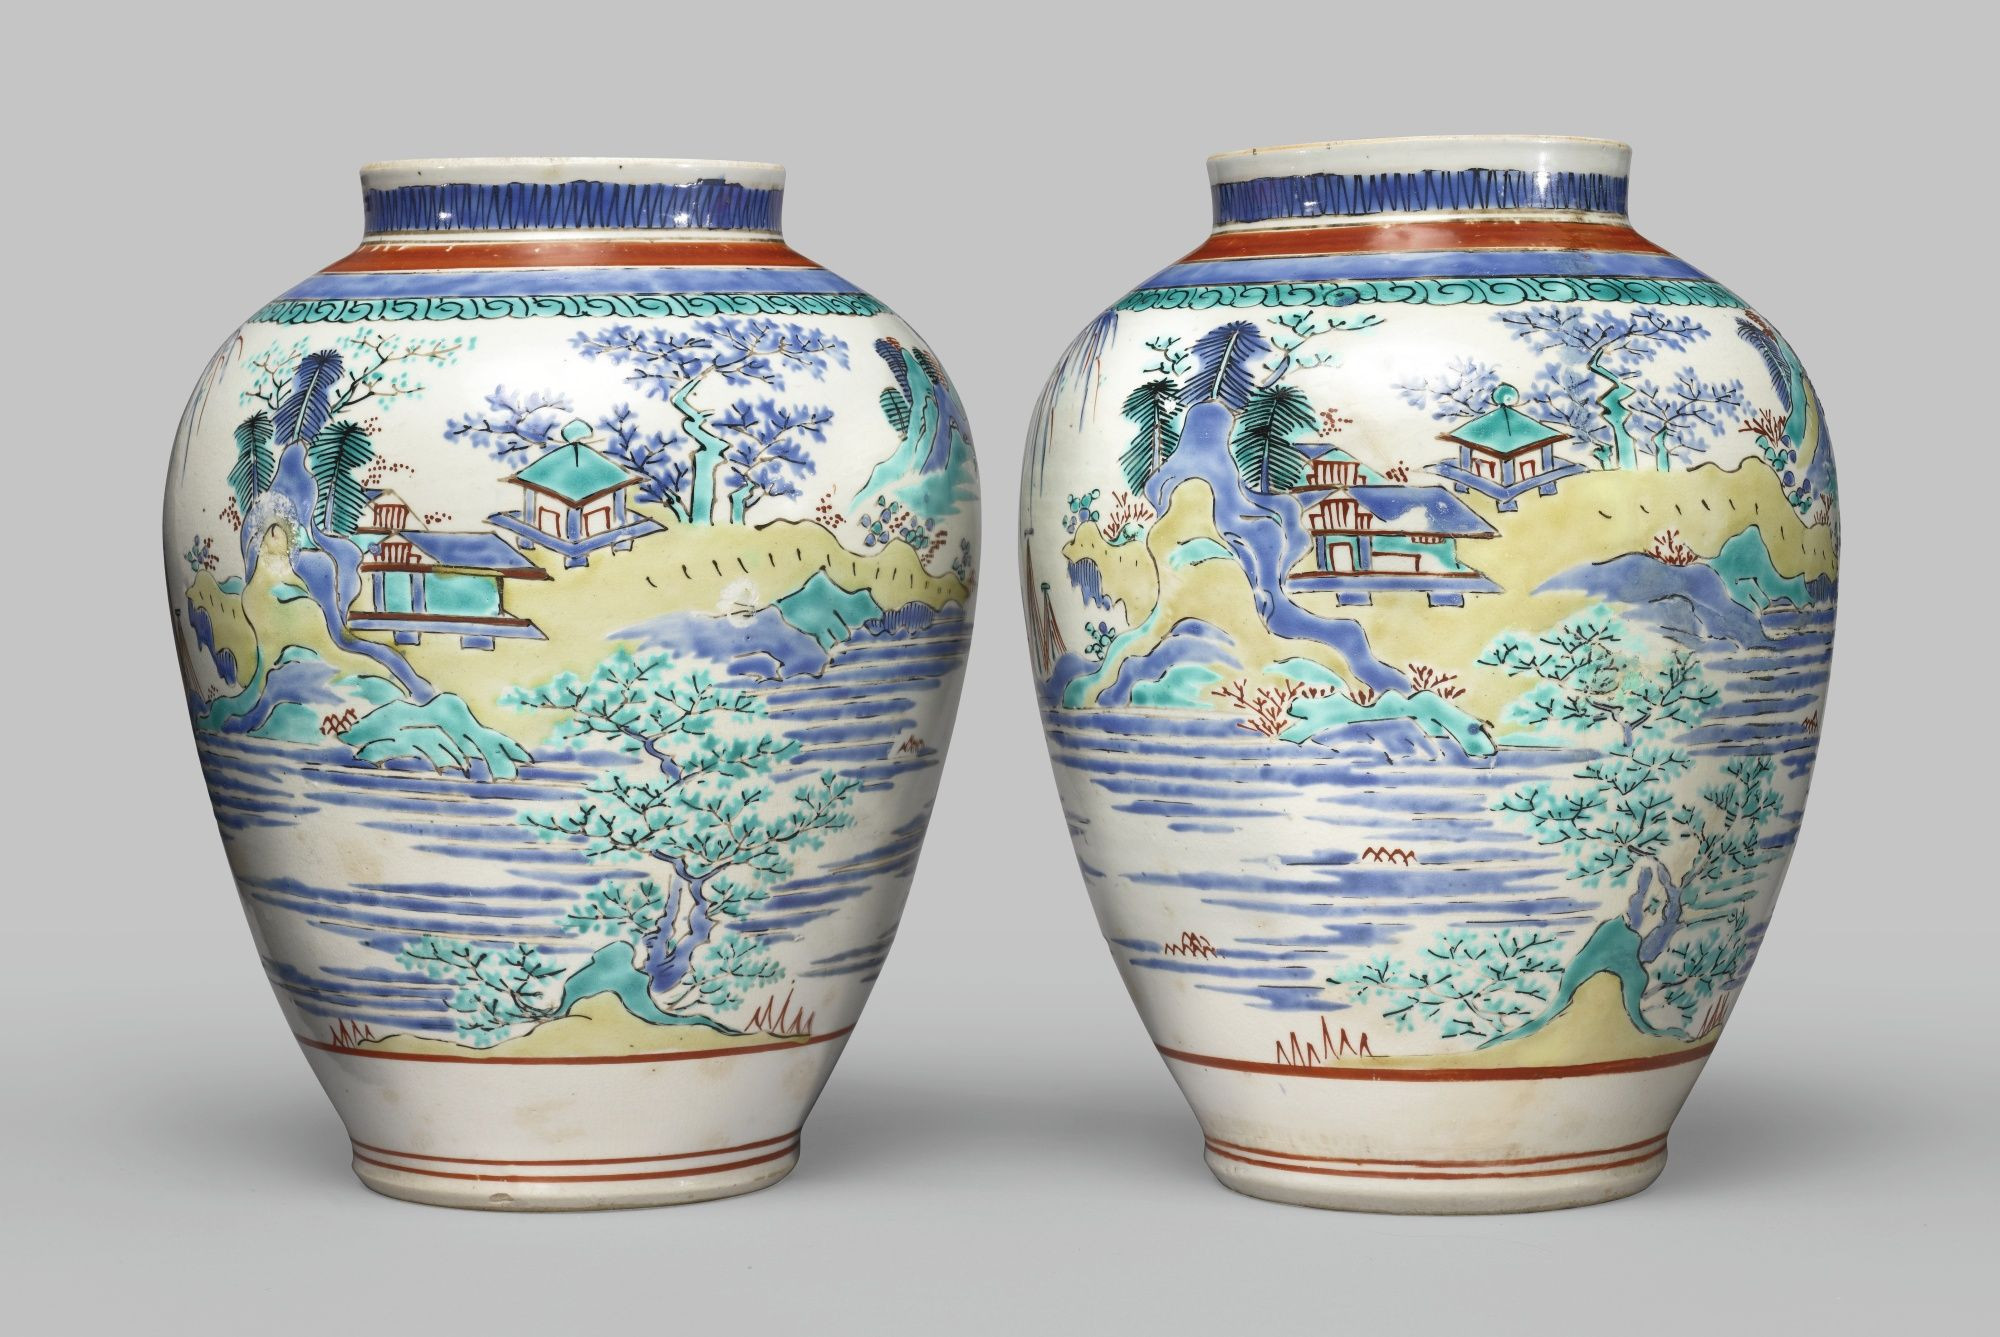 24 Great Large White Urn Vase 2023 free download large white urn vase of a pair of large kakiemon vases japan late 17th century each of with regard to a pair of large kakiemon vases japan late 17th century each of ovoid form decorated in o